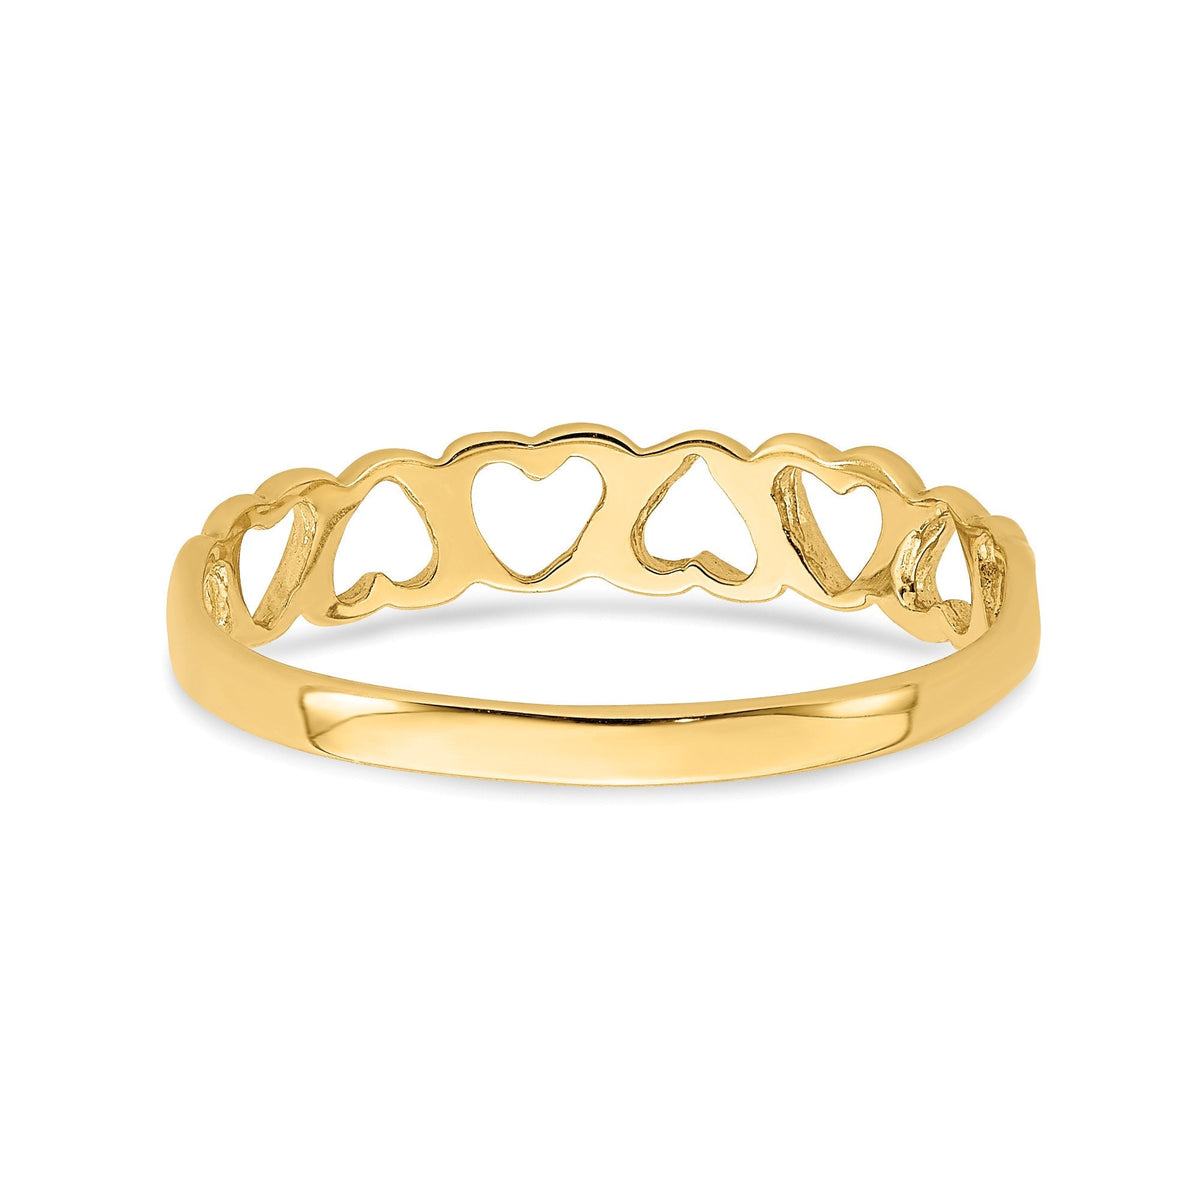 Womens 14k Gold Heart Ring Band Polished Heart Ring  Genuine 14k Gold (Not Plated or Filled) Gift Box Included